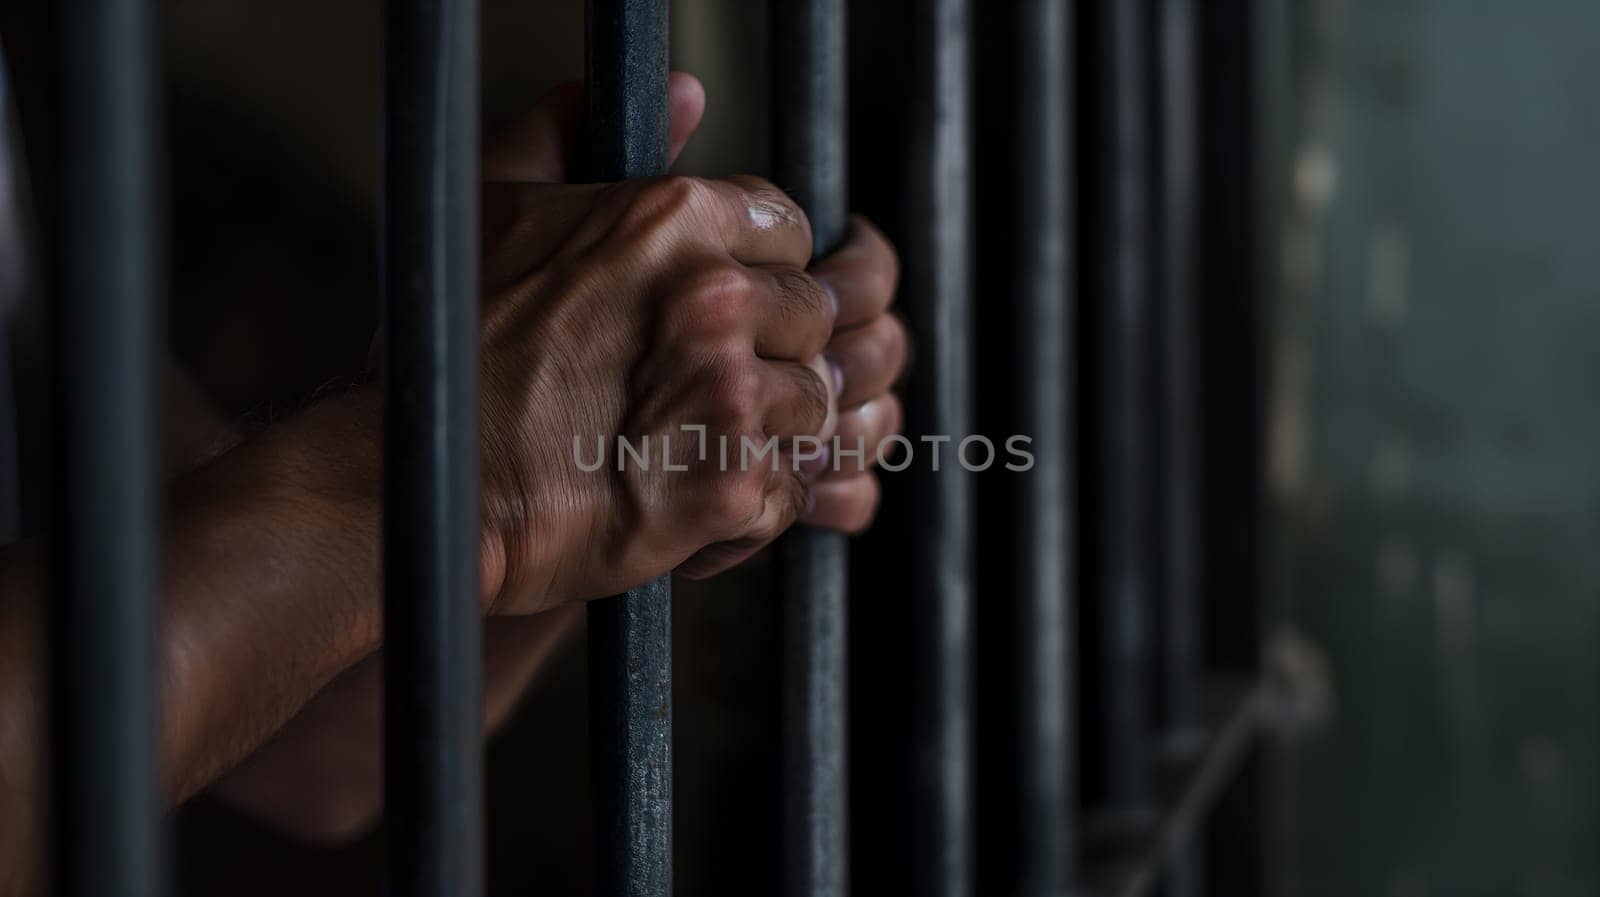 Gripping the Bars: A Close-Up of Hands in Confinement by chrisroll